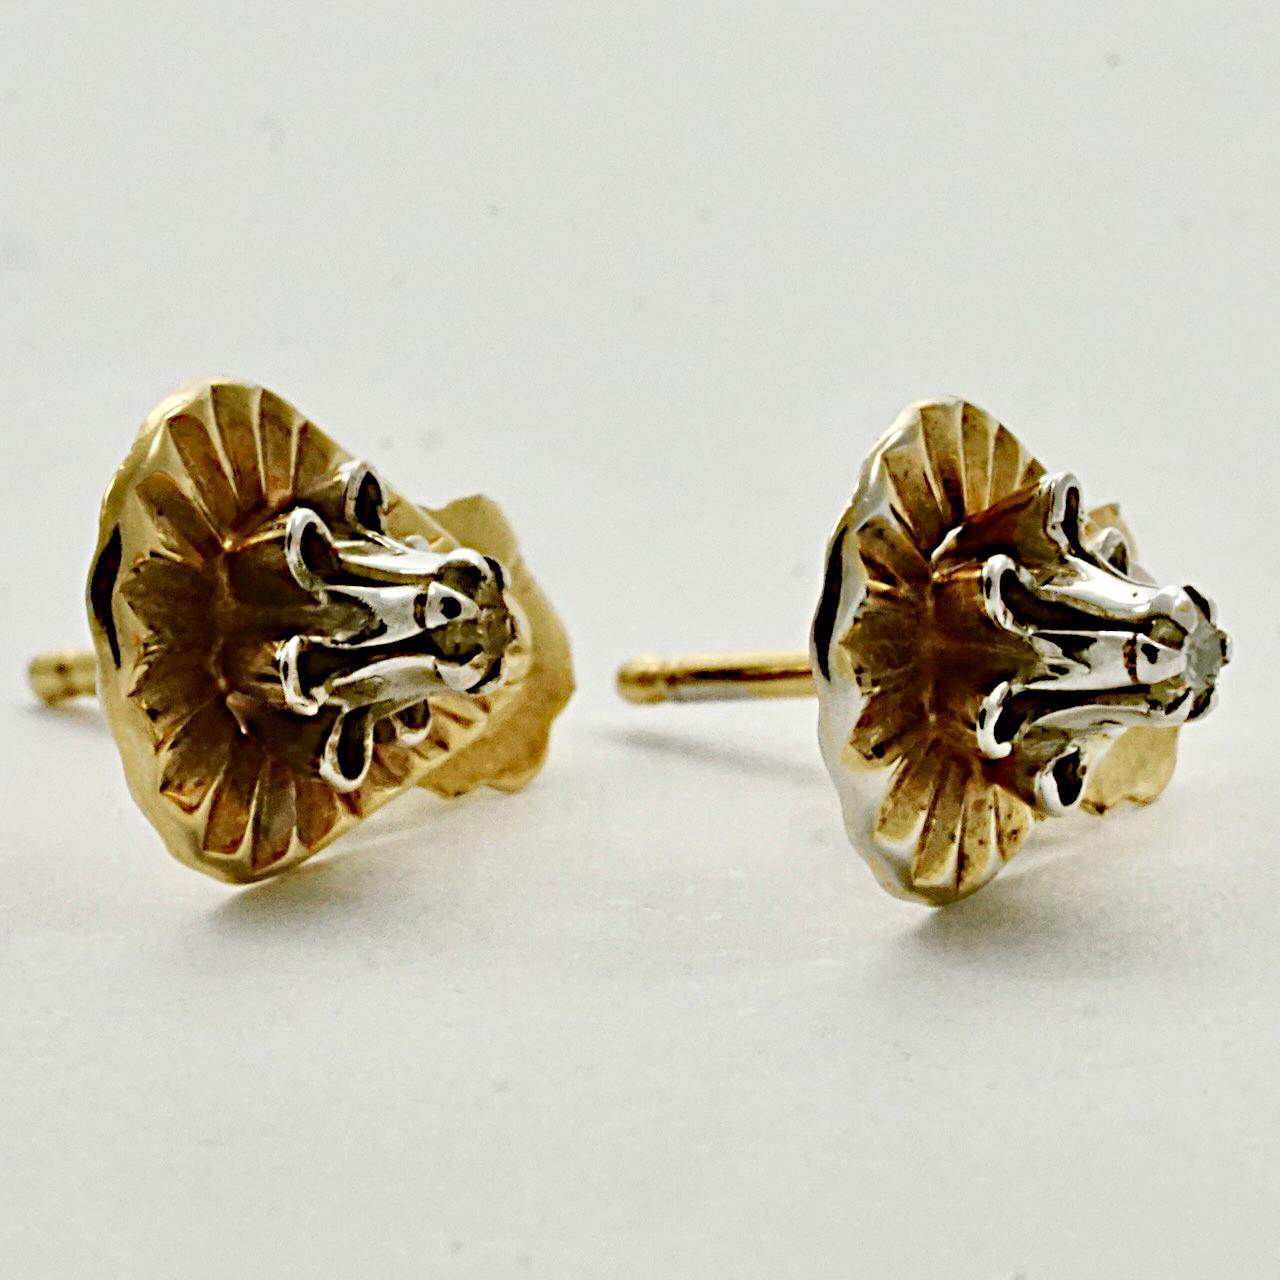 Gold Teardrop Diamond Cut Stud Earrings set with Diamonds circa 1940s In Good Condition For Sale In London, GB